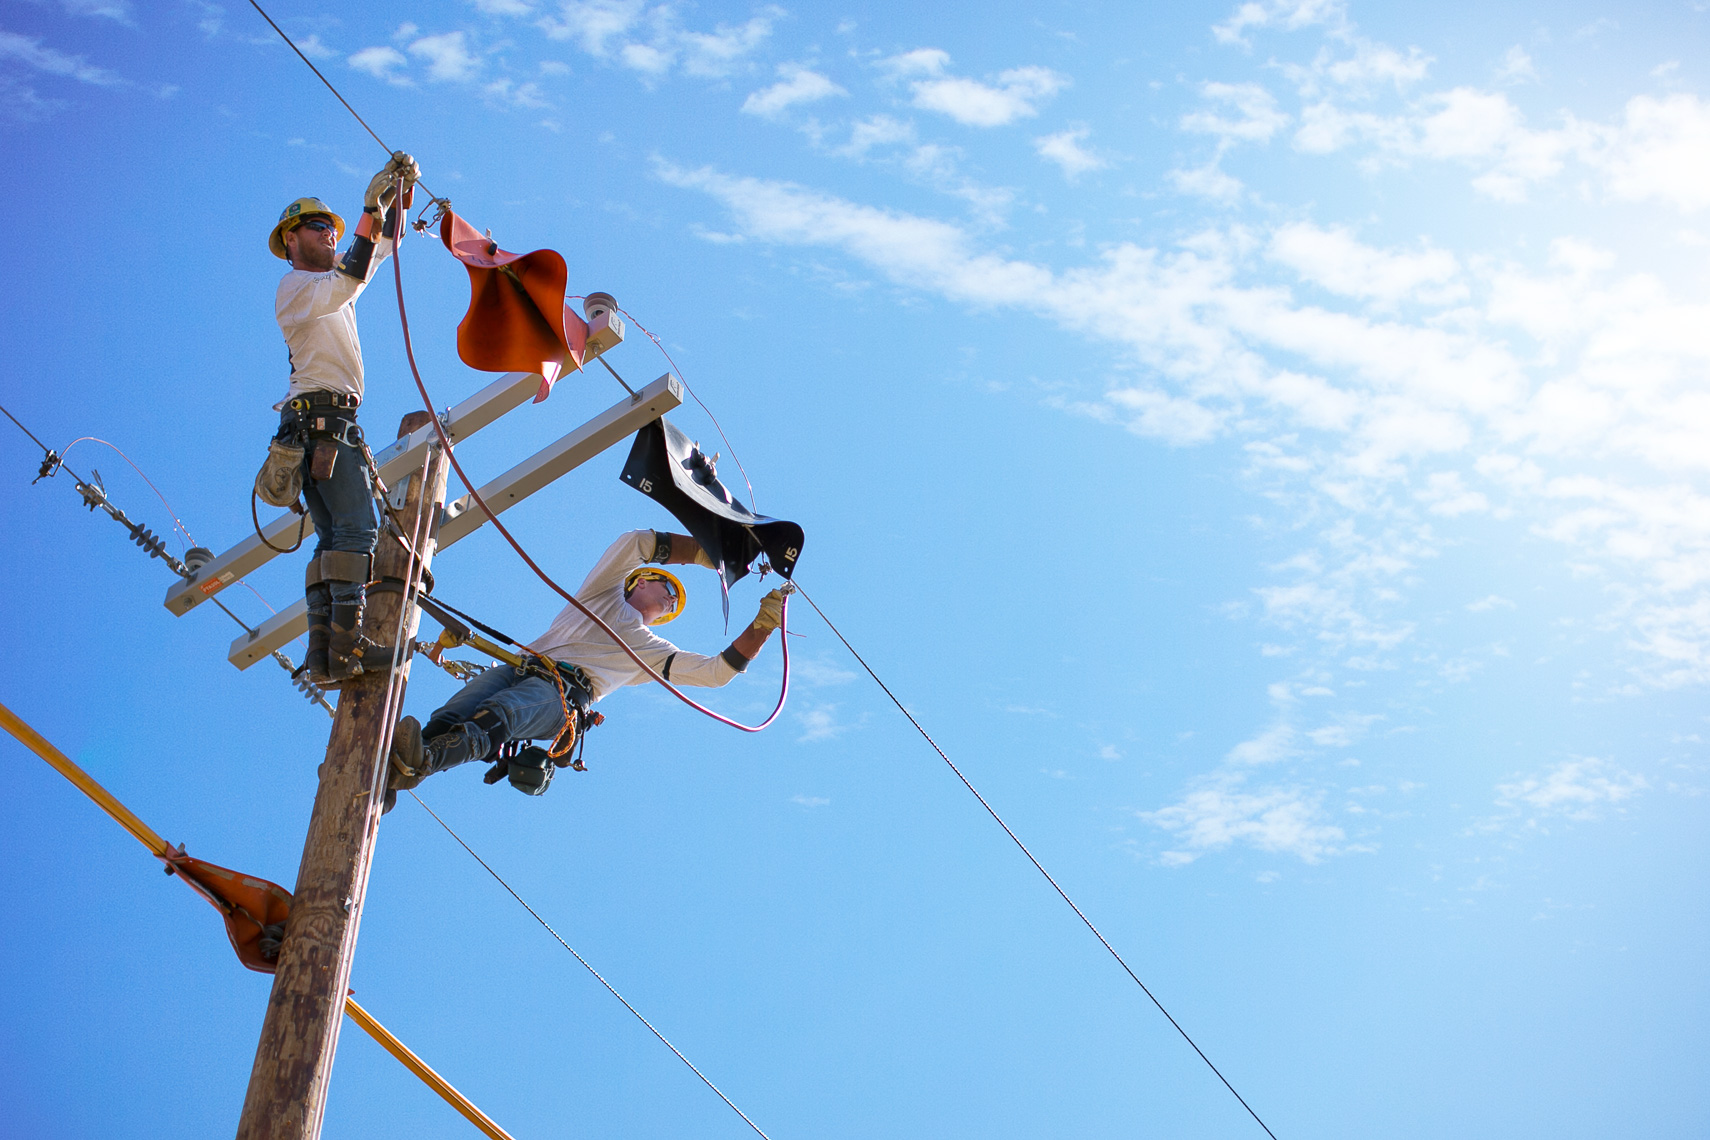 Powerline_Workers_Rodeo_20180428_photo_by_Justin_Kase_Conder_0458_Retouched_V01_Work.JPG